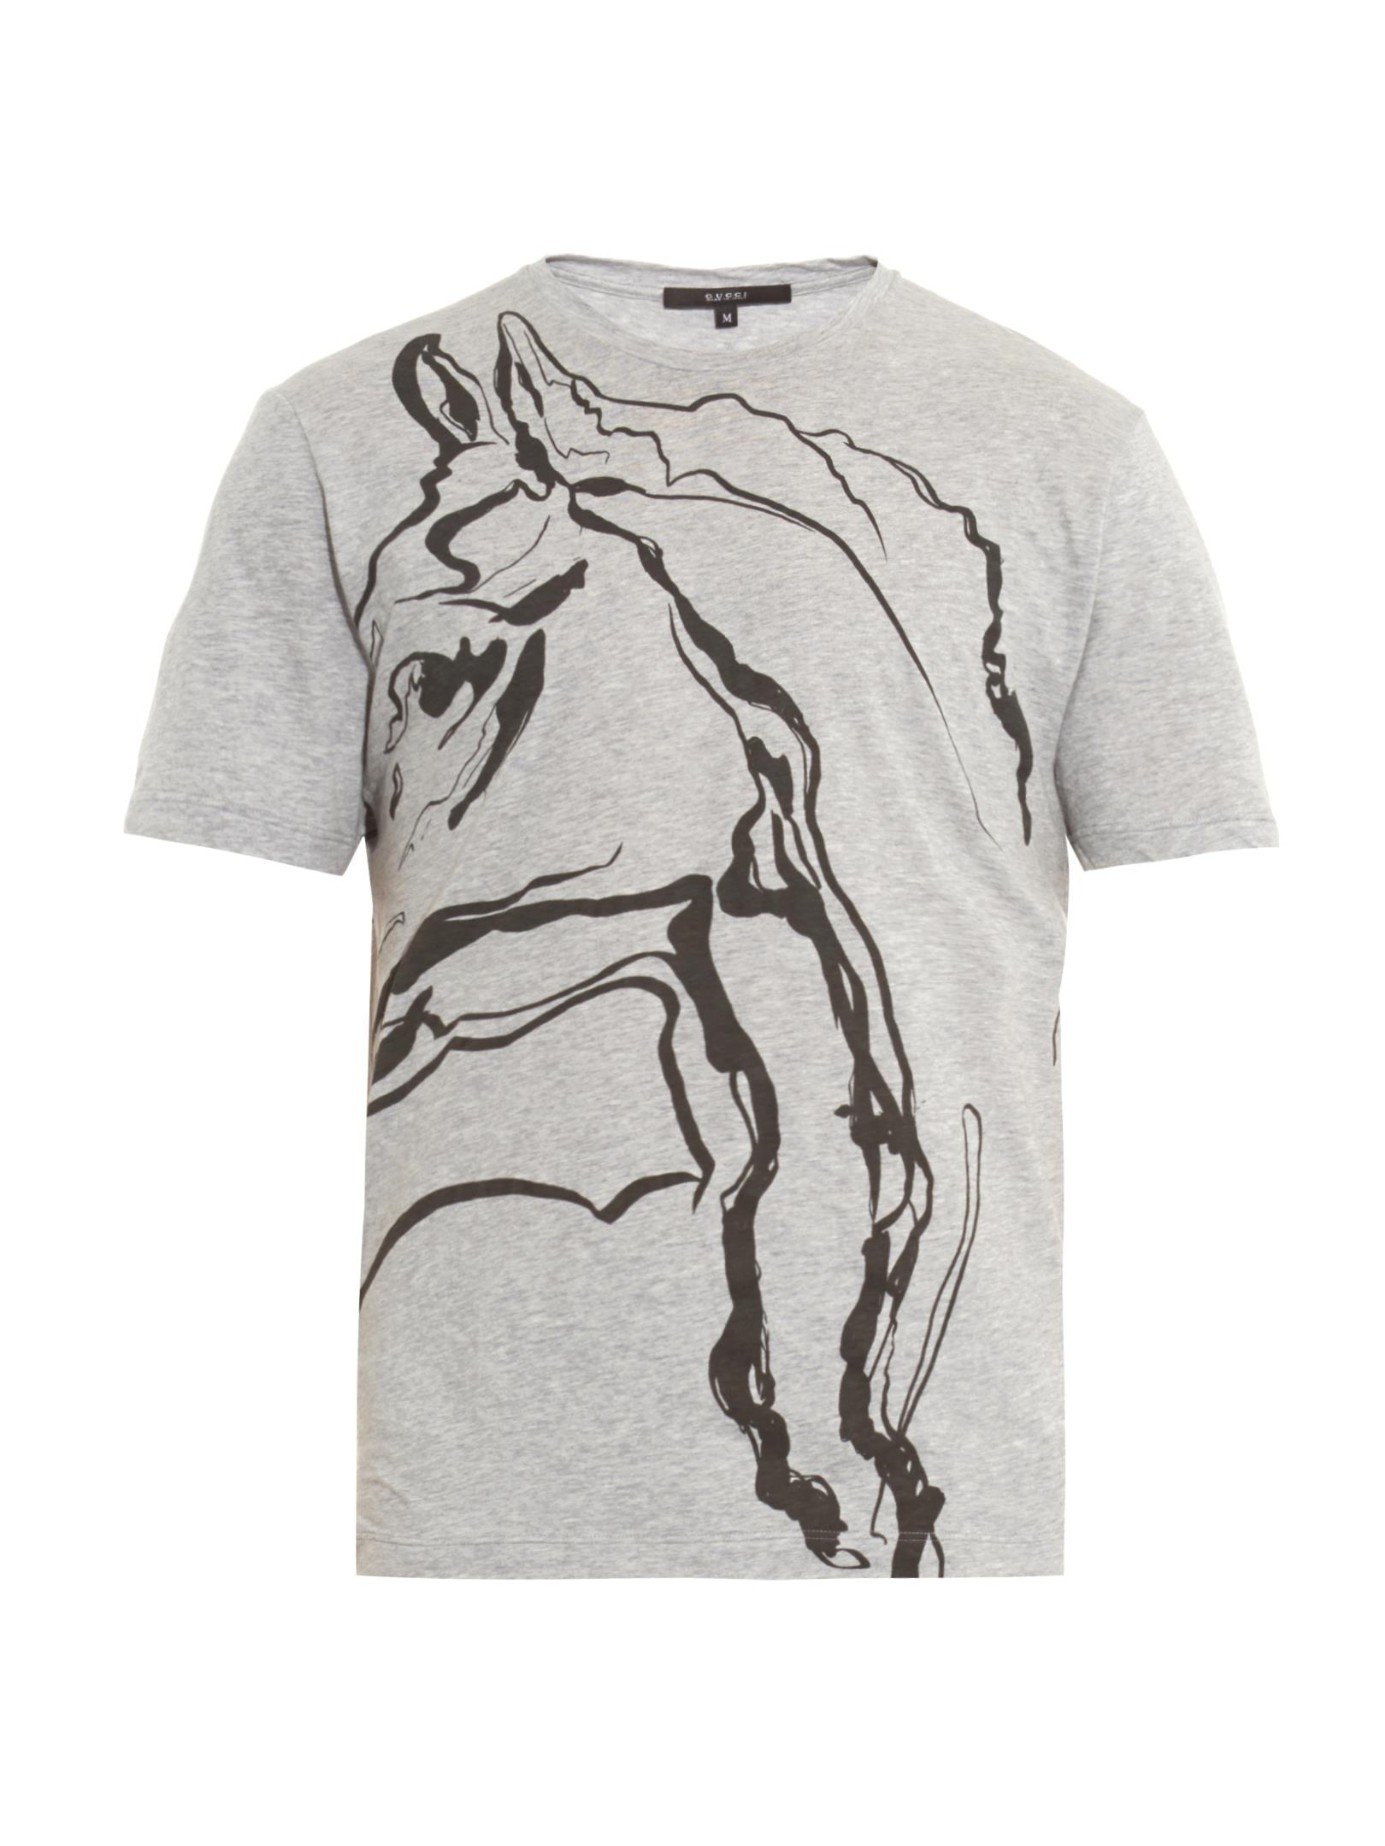 Gucci Horse-Print Cotton T-Shirt in 